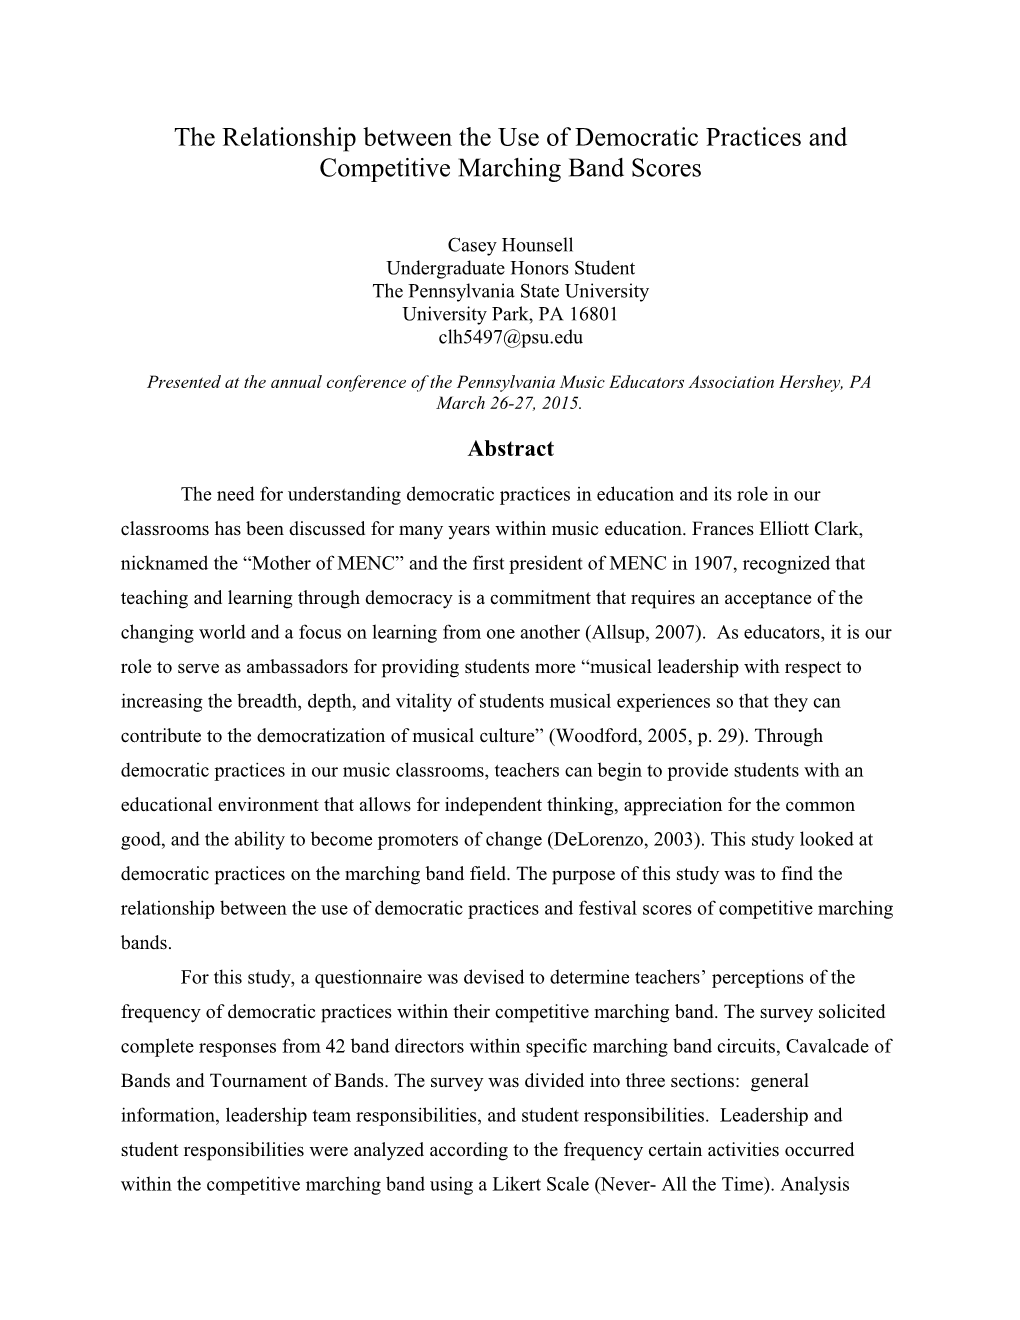 The Relationship Between the Use of Democratic Practices and Competitive Marching Band Scores